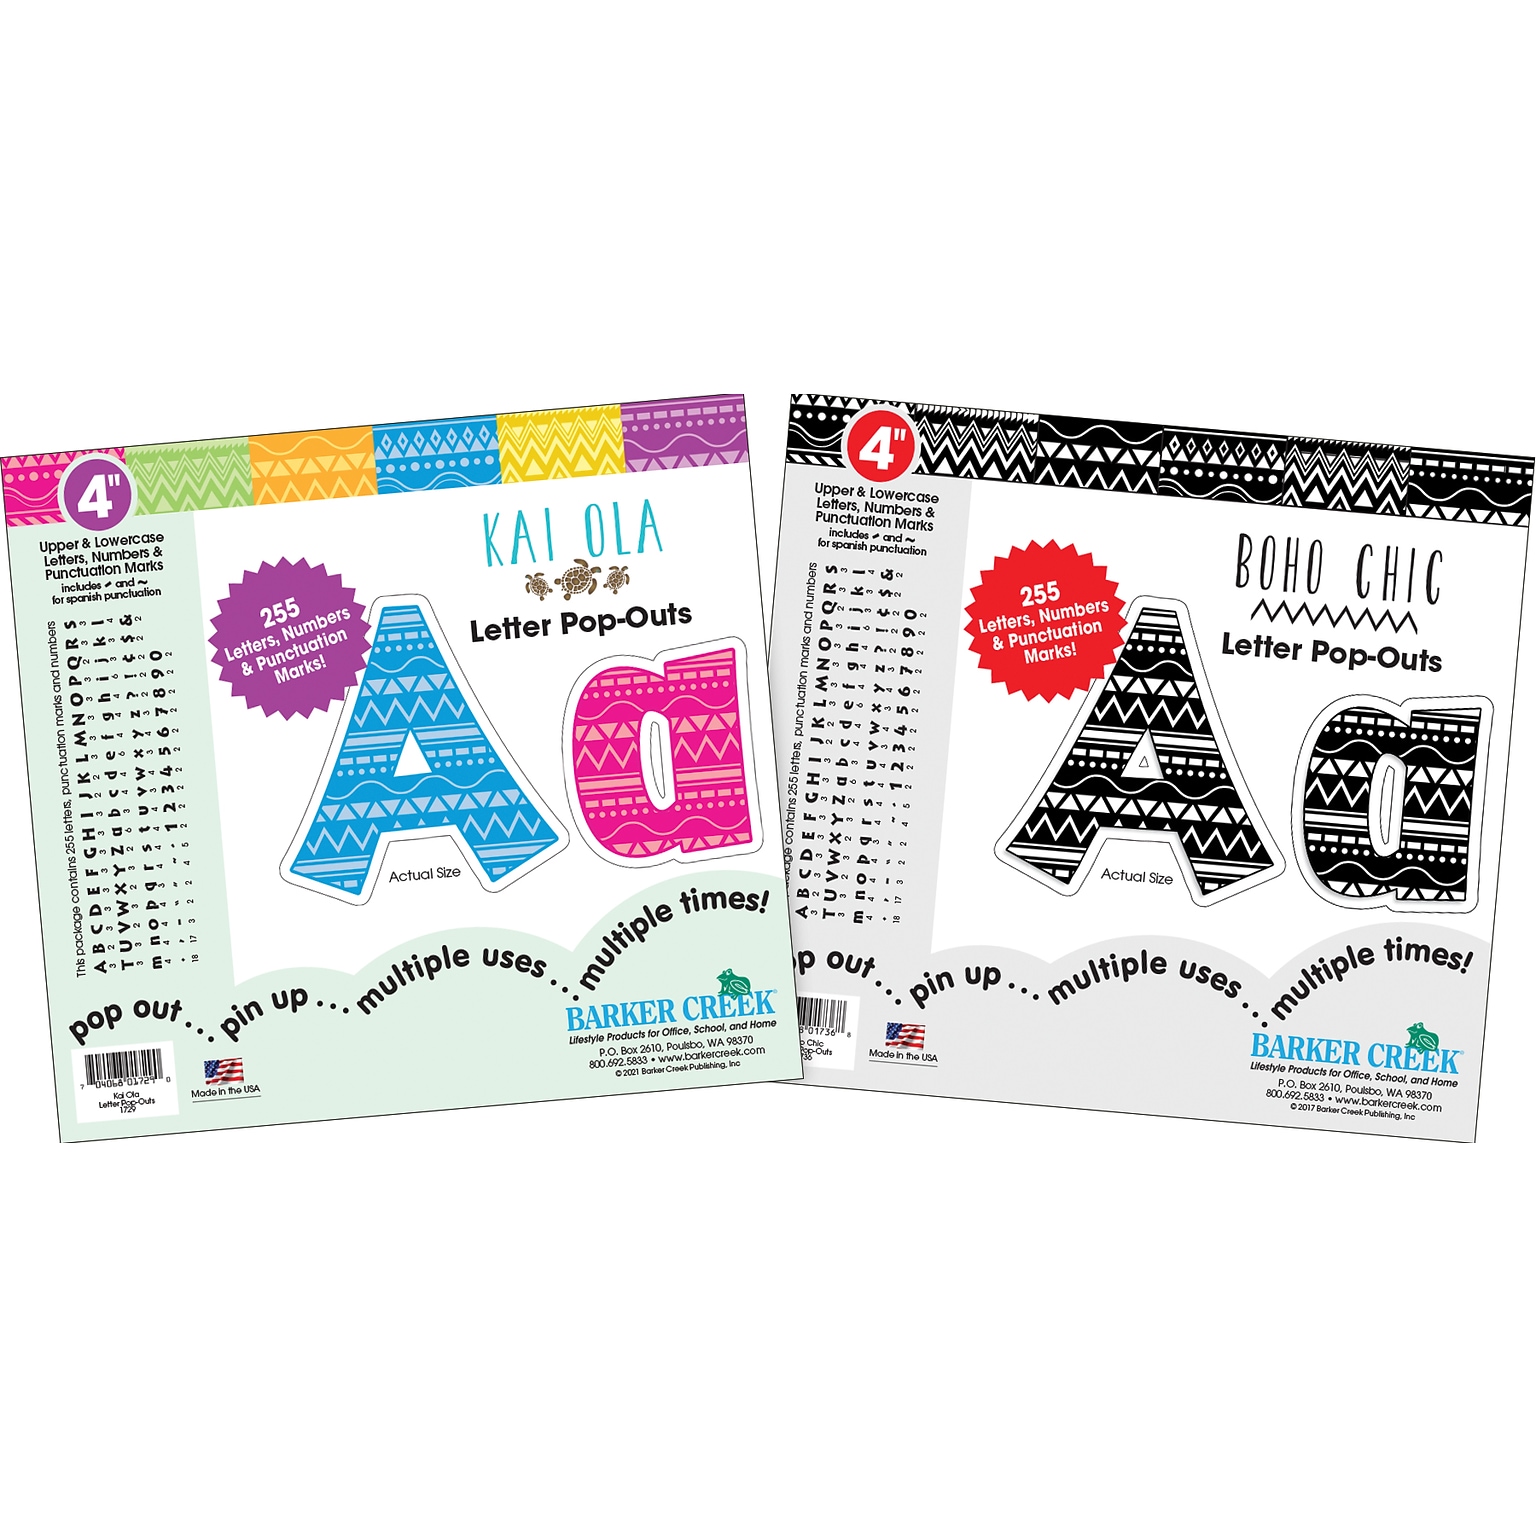 Barker Creek 4 Letter Pop-Out 2-Pack, Boho Chic & Kai Ola, 510 Characters/Set (BC3851)